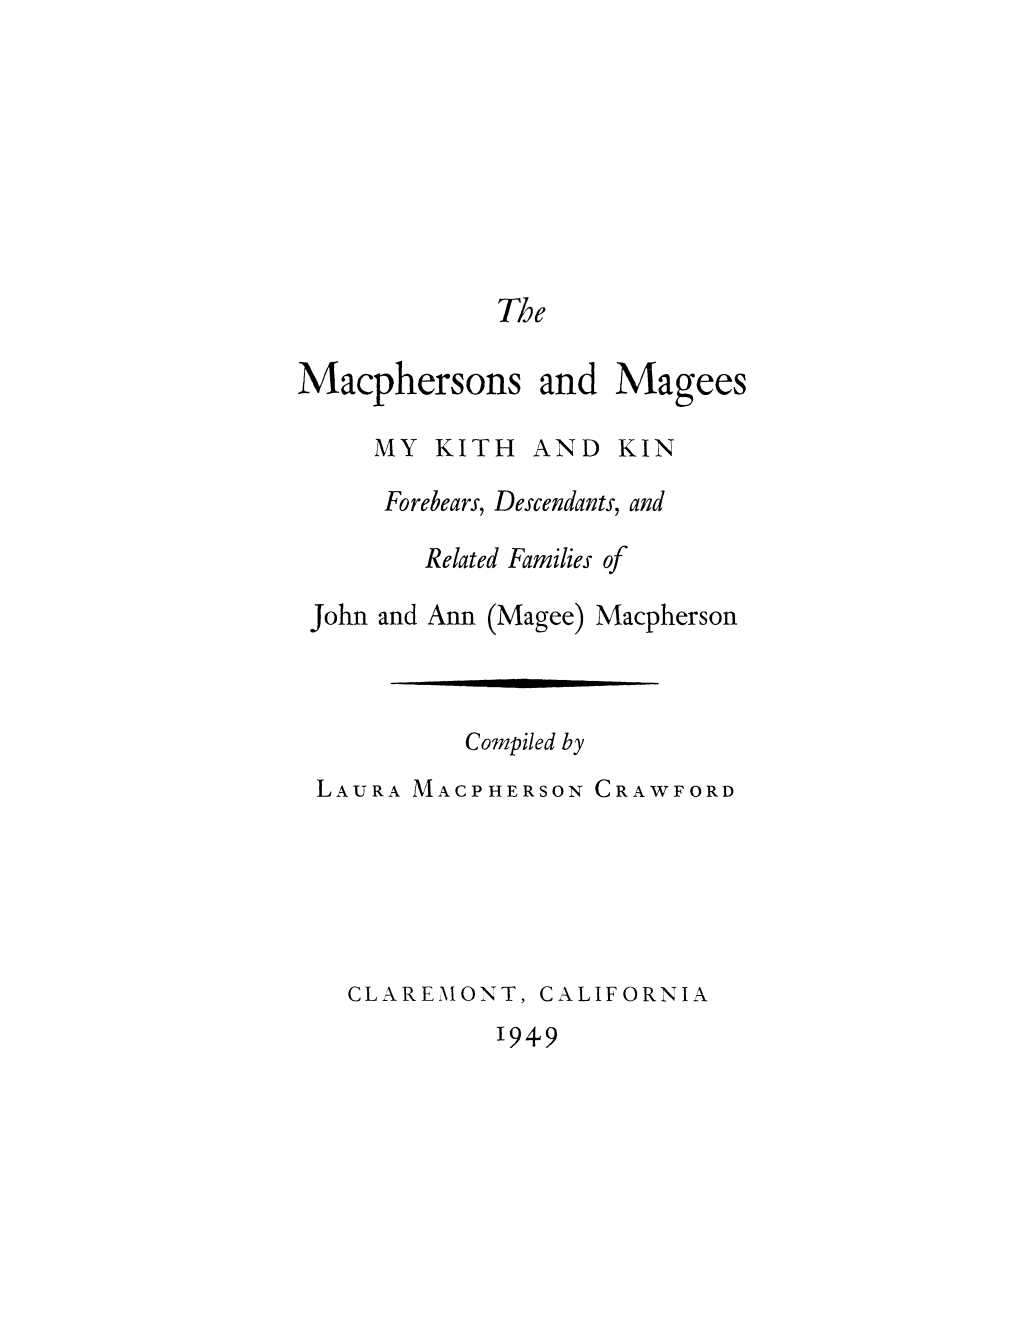 Macphersons and Magees